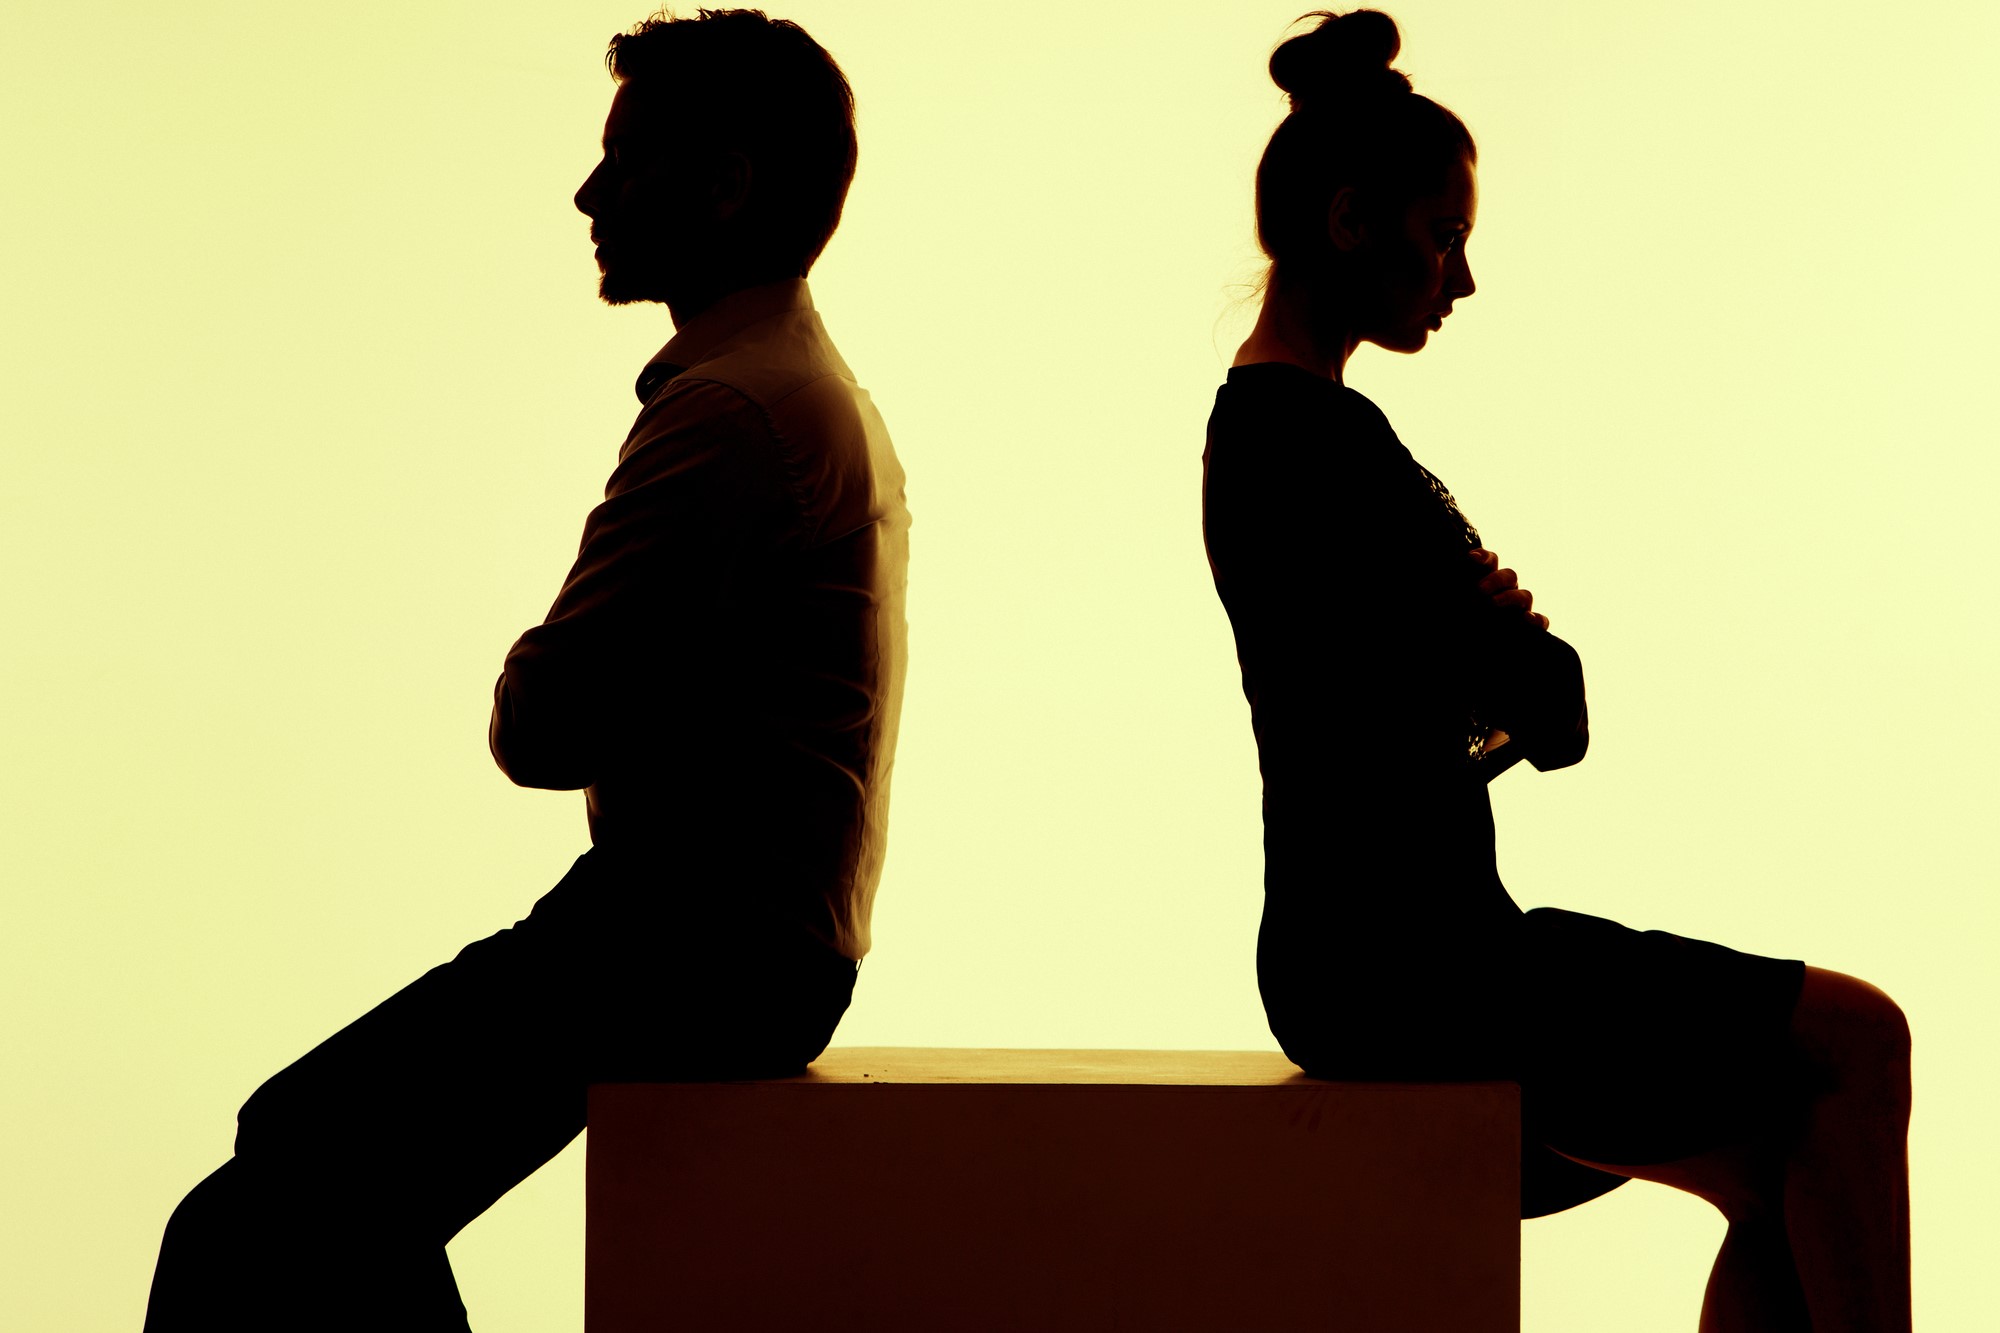 silhouette of man and woman with backs turned to one another